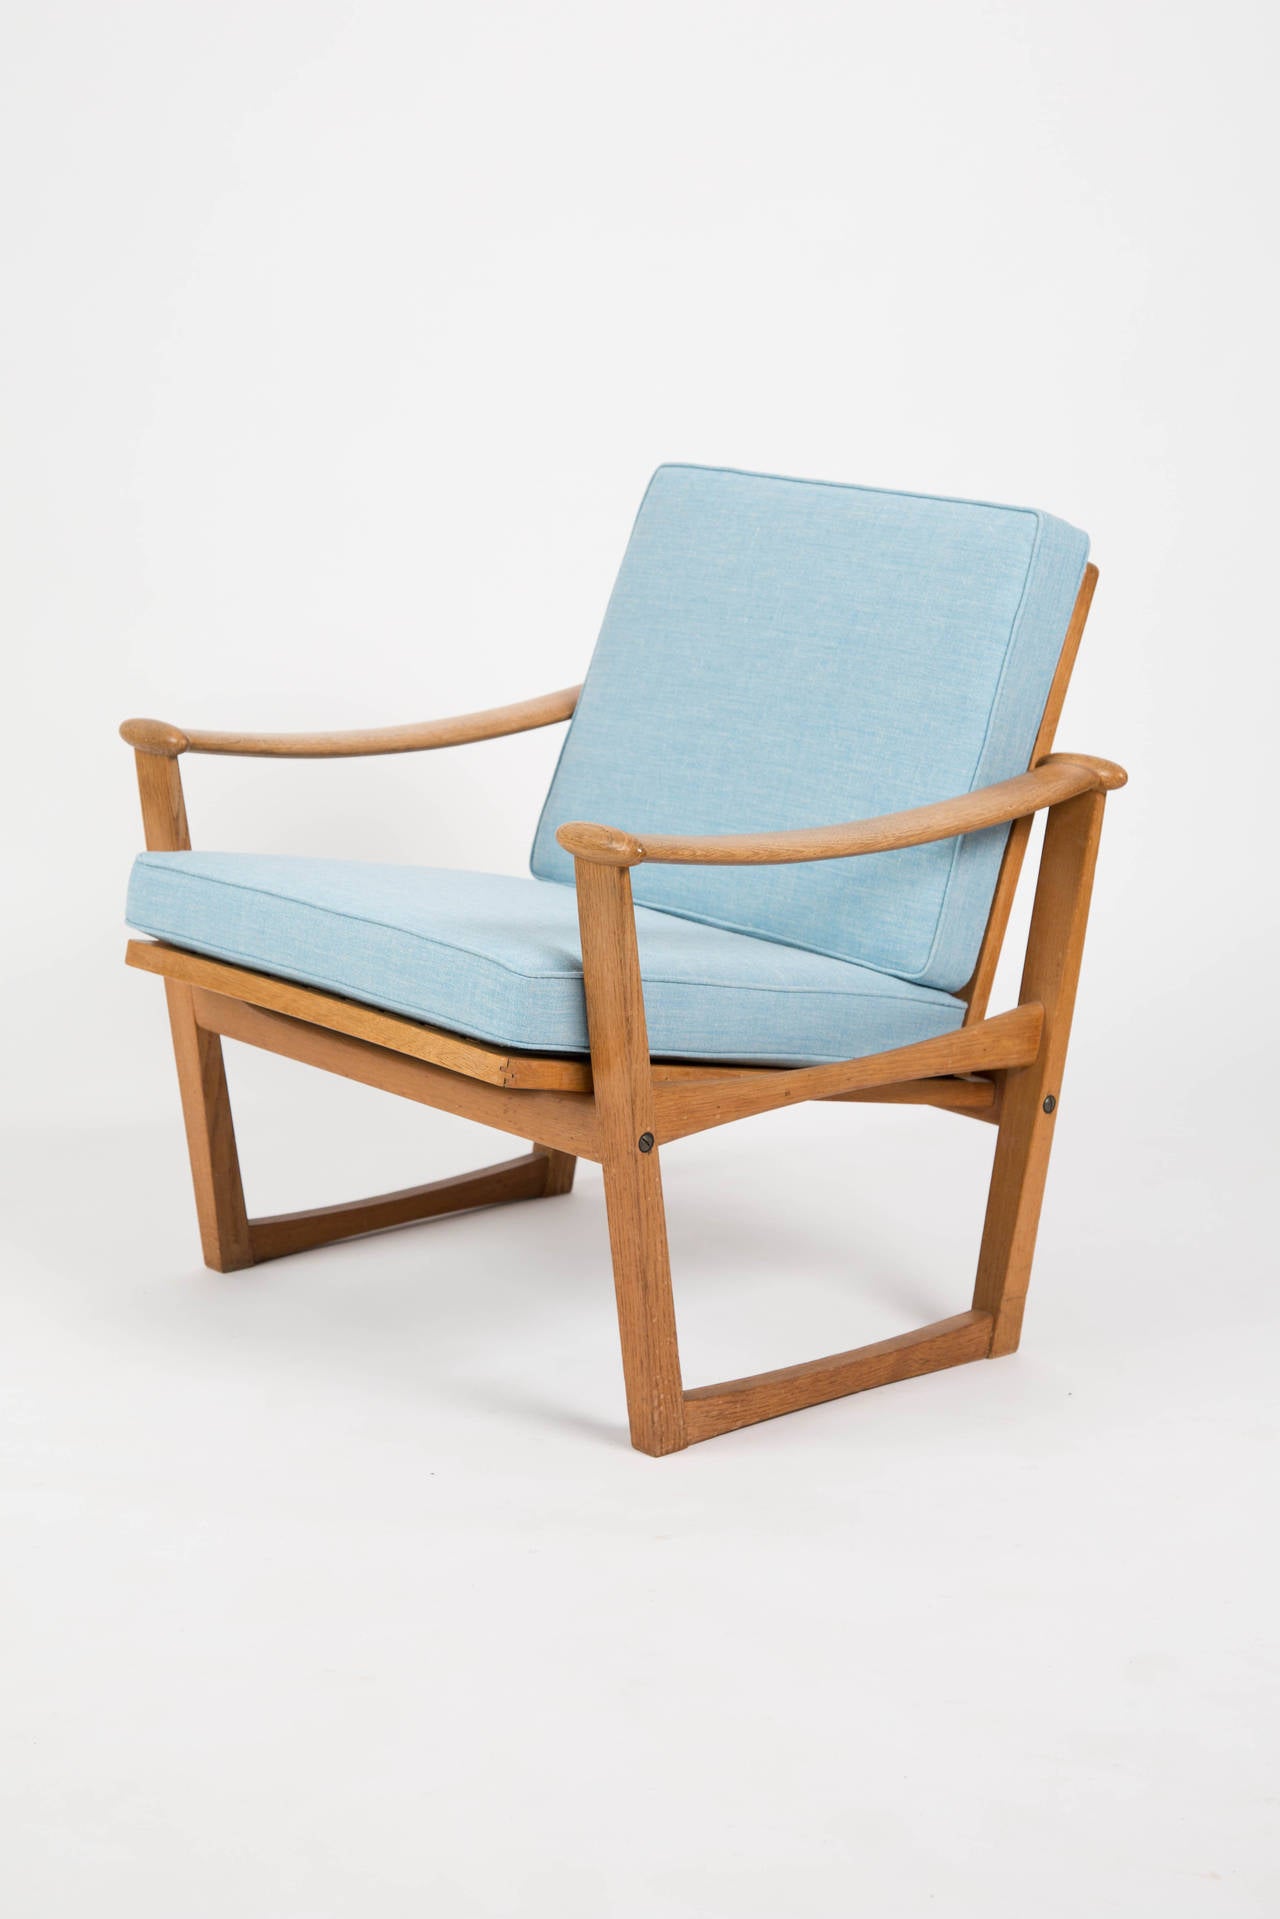 Finn Juhl style. A set of two Finn Juhl style lounge chairs made by Pastoe. The chairs are designed by M.Nissen in Demark. The chairs are of oak wood. The chairs are reupholstered with a blue fabric of wool and hemp. Long time people thought the